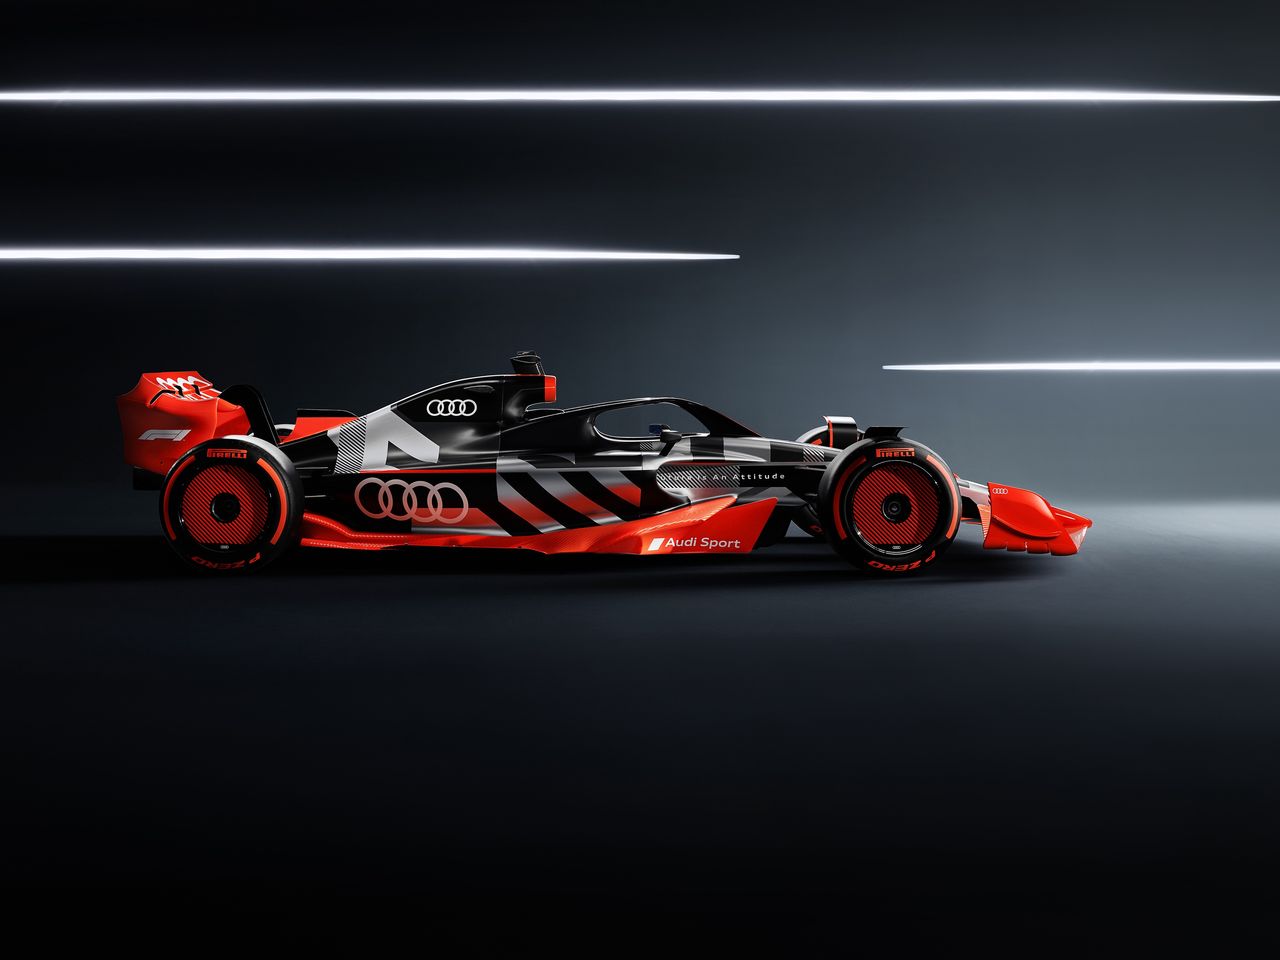 Audi accelerates into Formula 1 with Nico Hülkenberg at the wheel